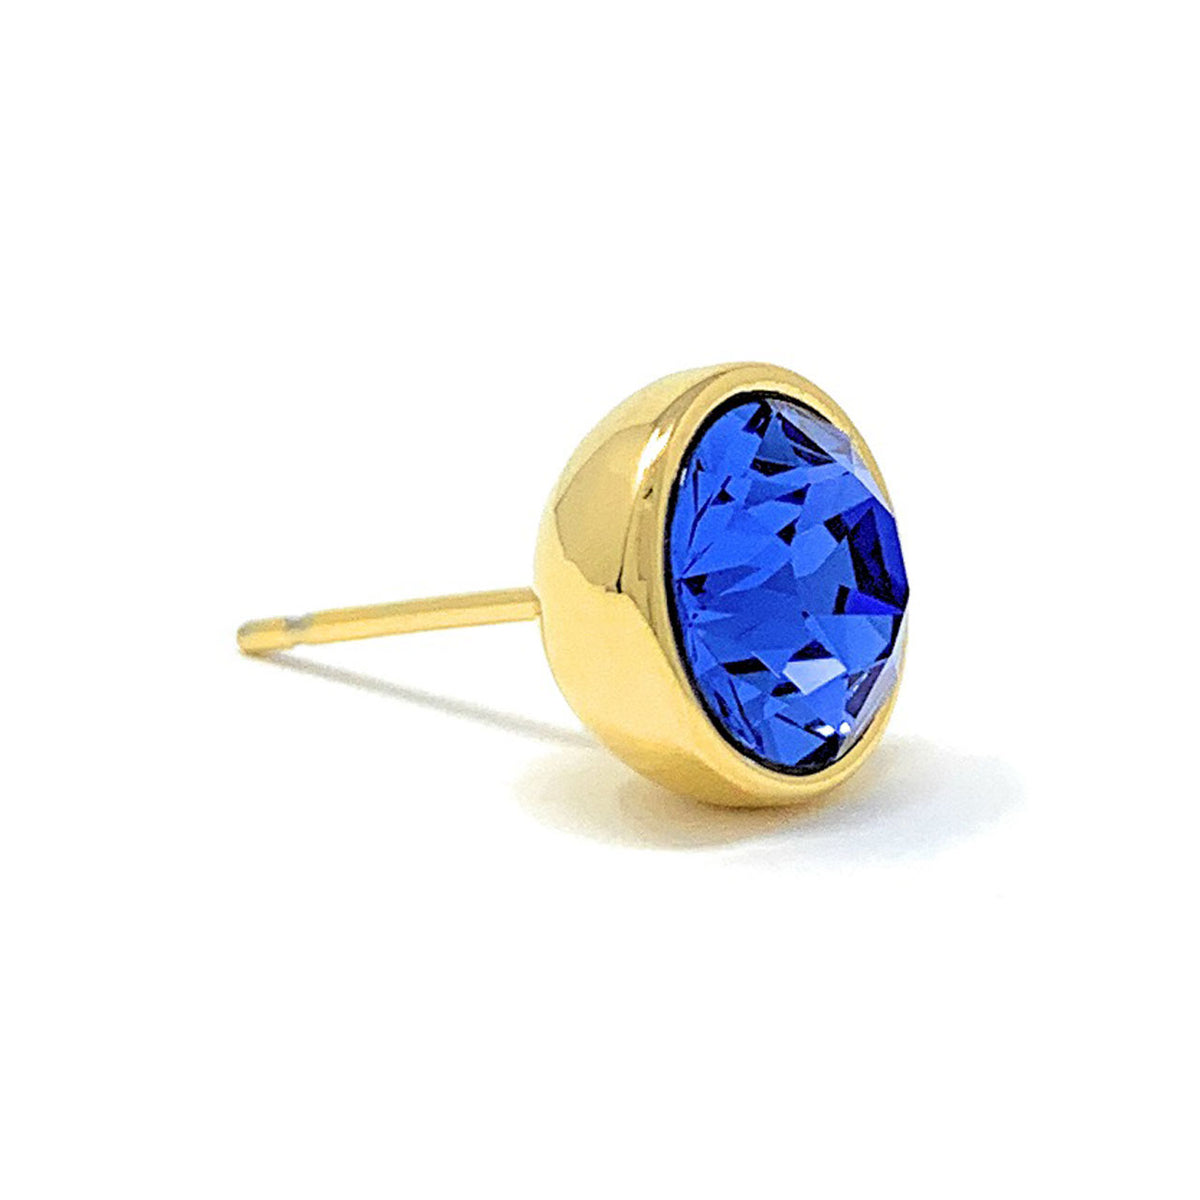 Harley Stud Earrings with Blue Sapphire Round Crystals from Swarovski Gold Plated - Ed Heart